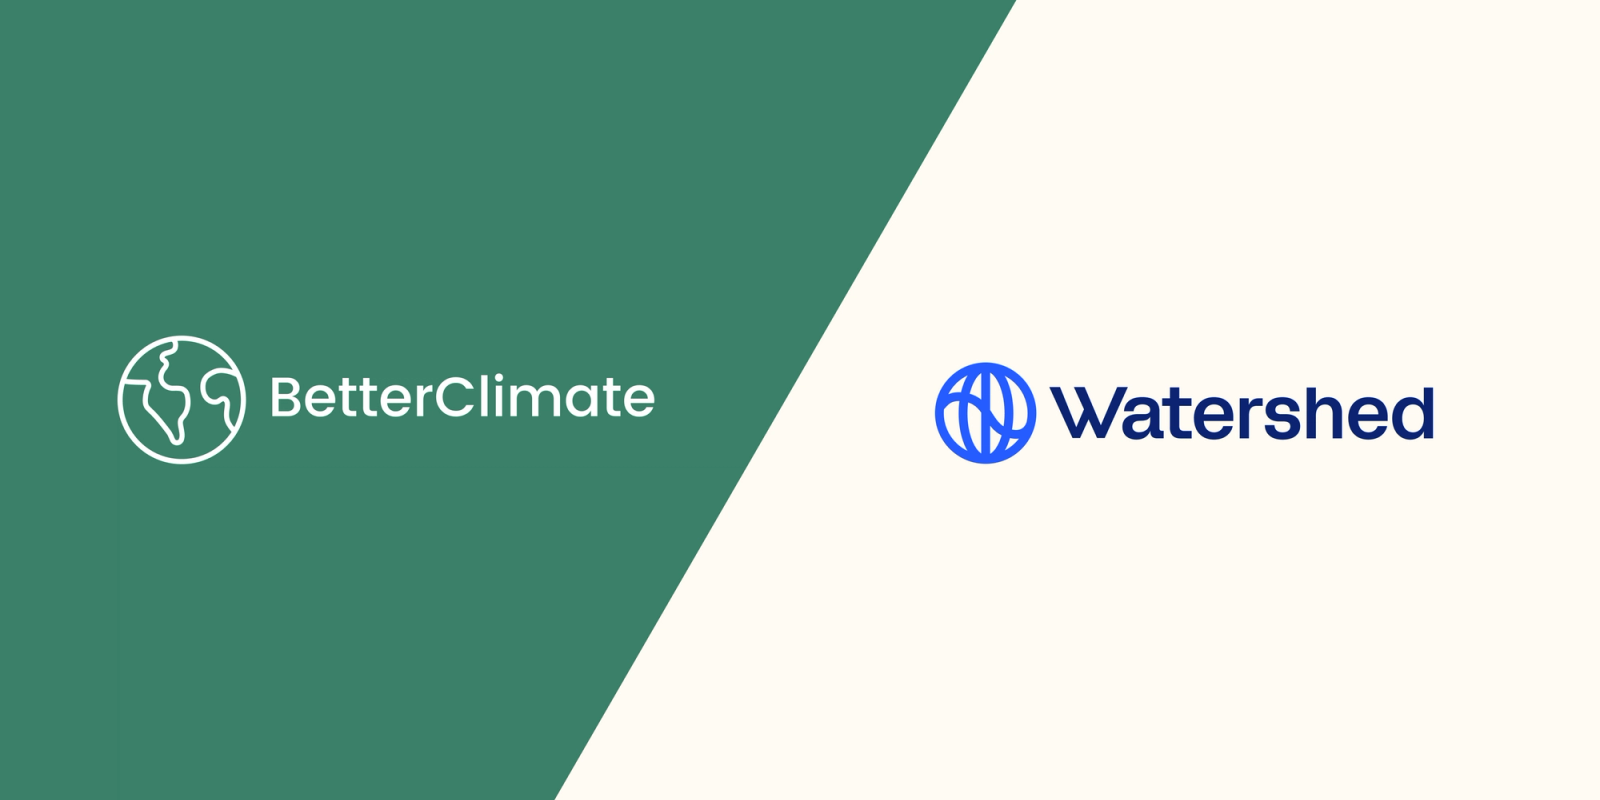 Better Climate joins Watershed